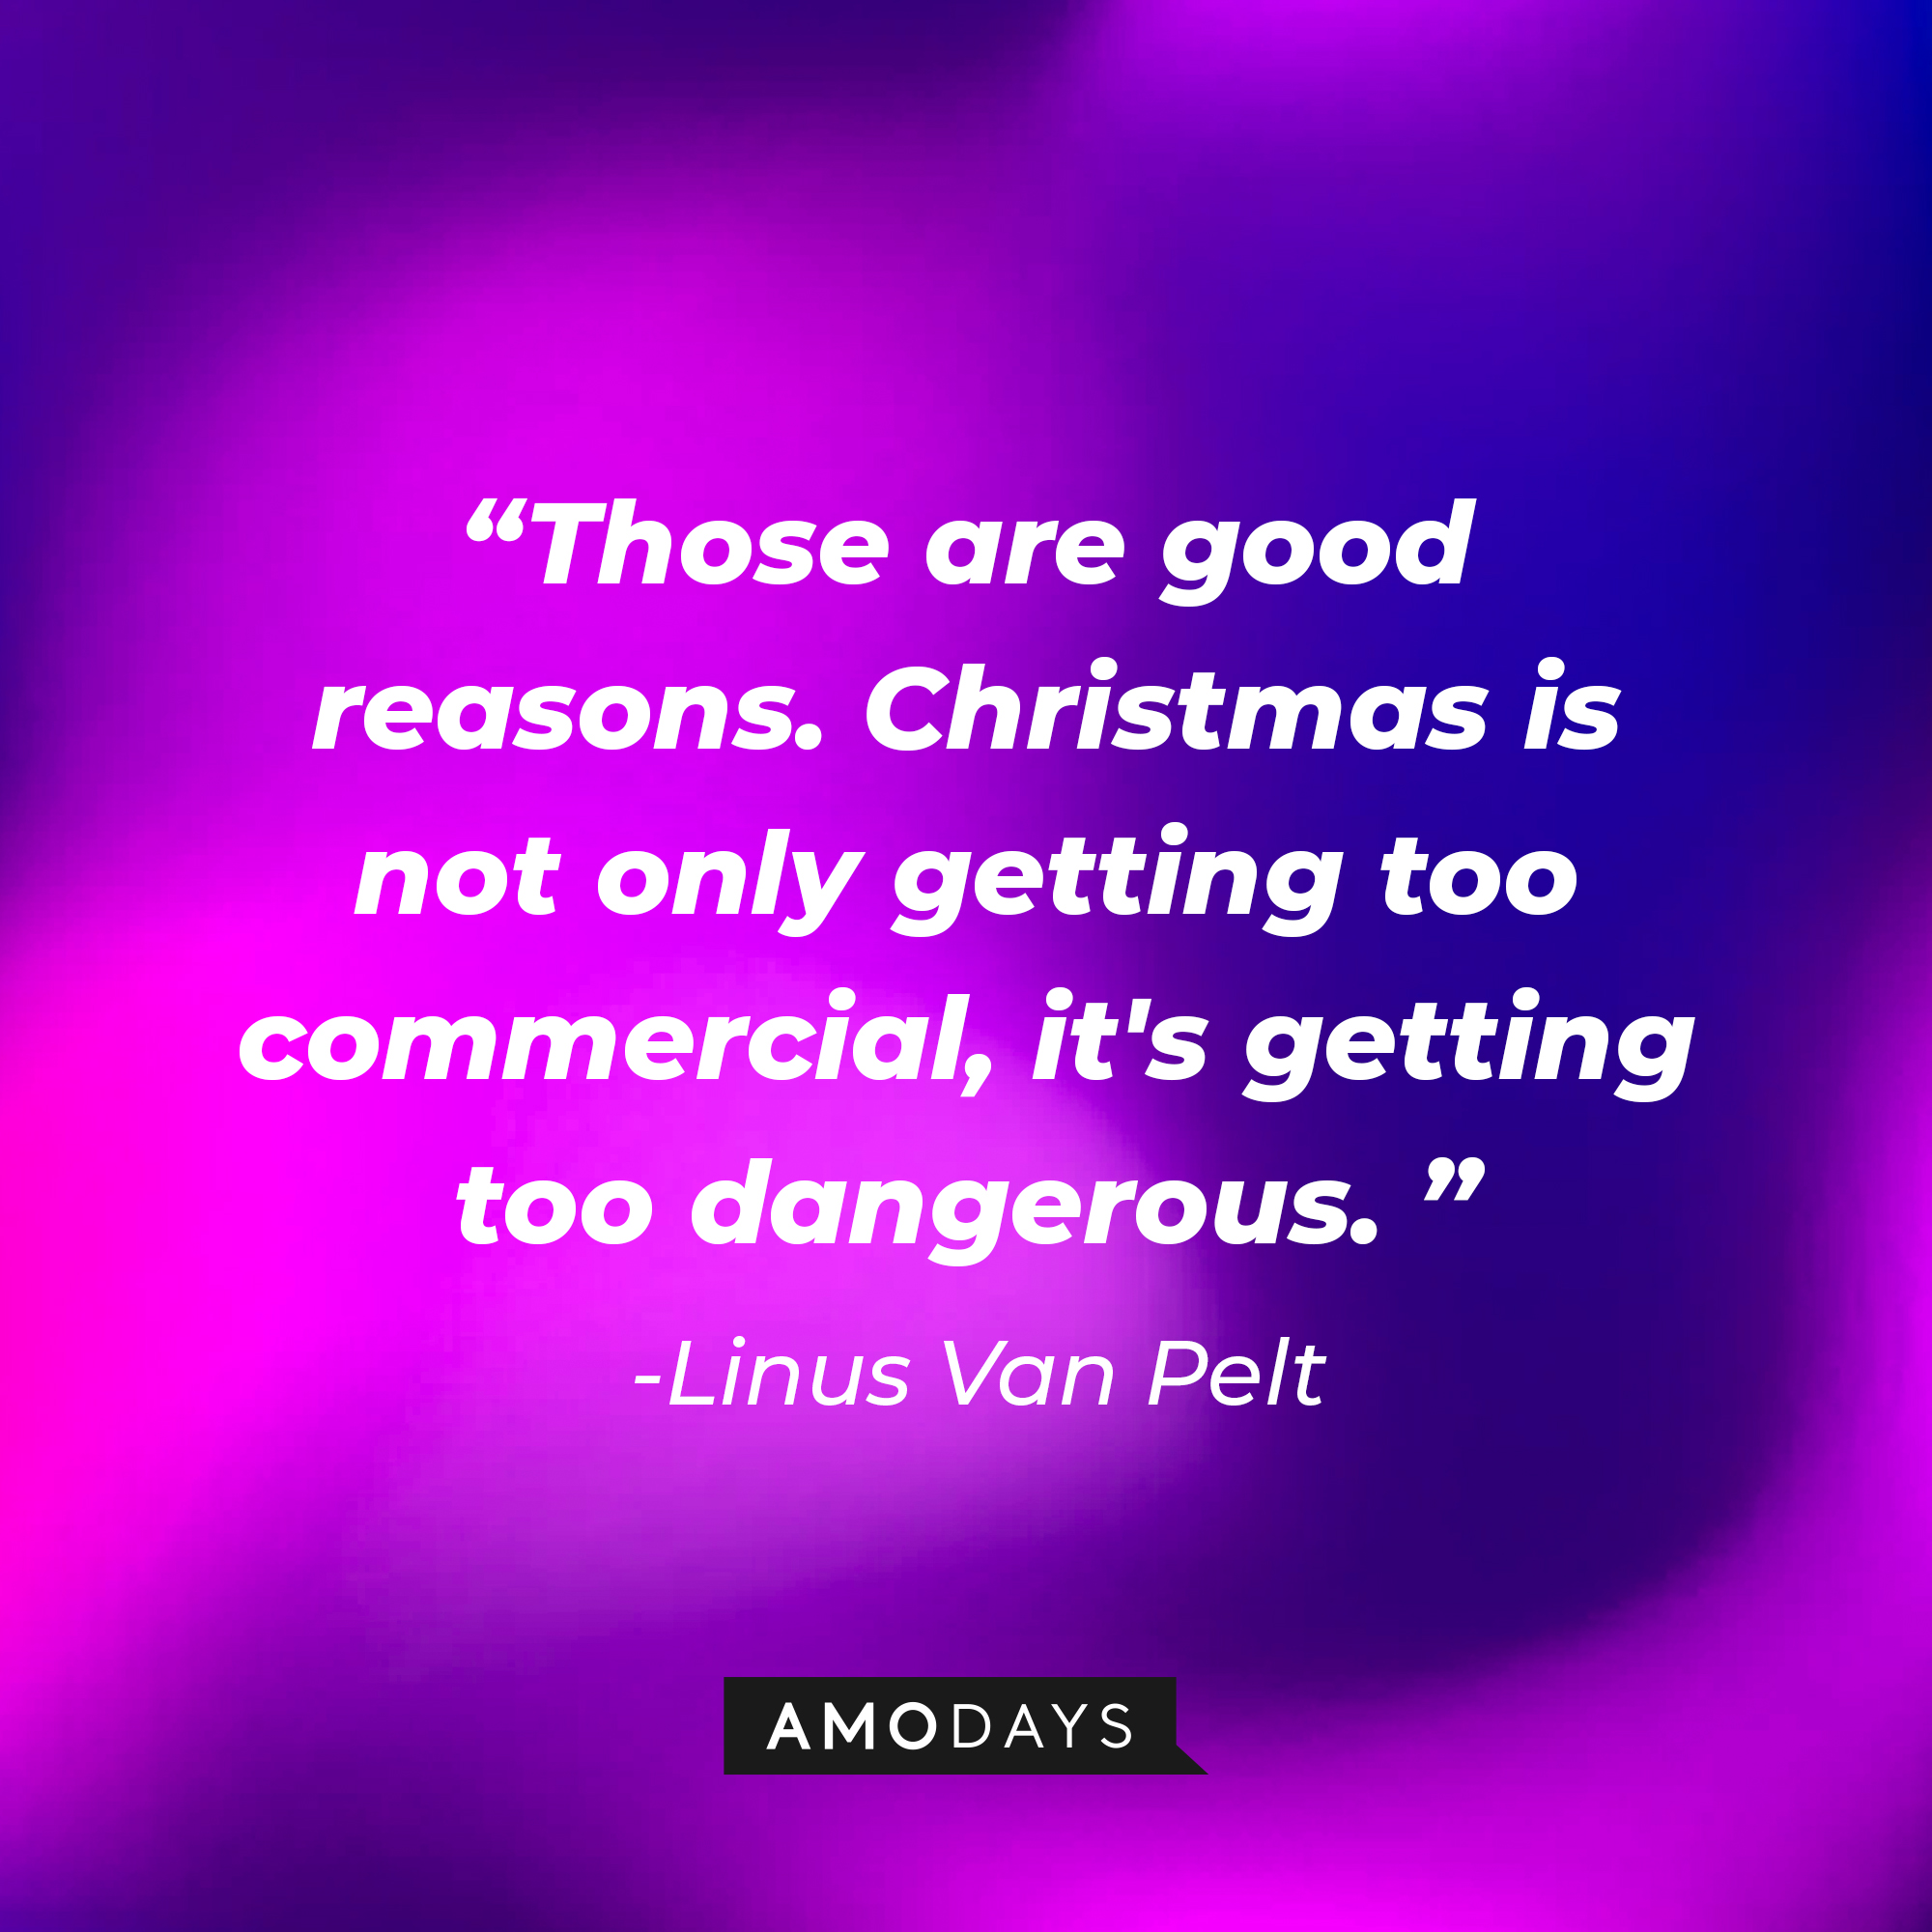 Linus Van Pelt's quote: "Those are good reasons. Christmas is not only getting too commercial, it's getting too dangerous." | Source: Amodays